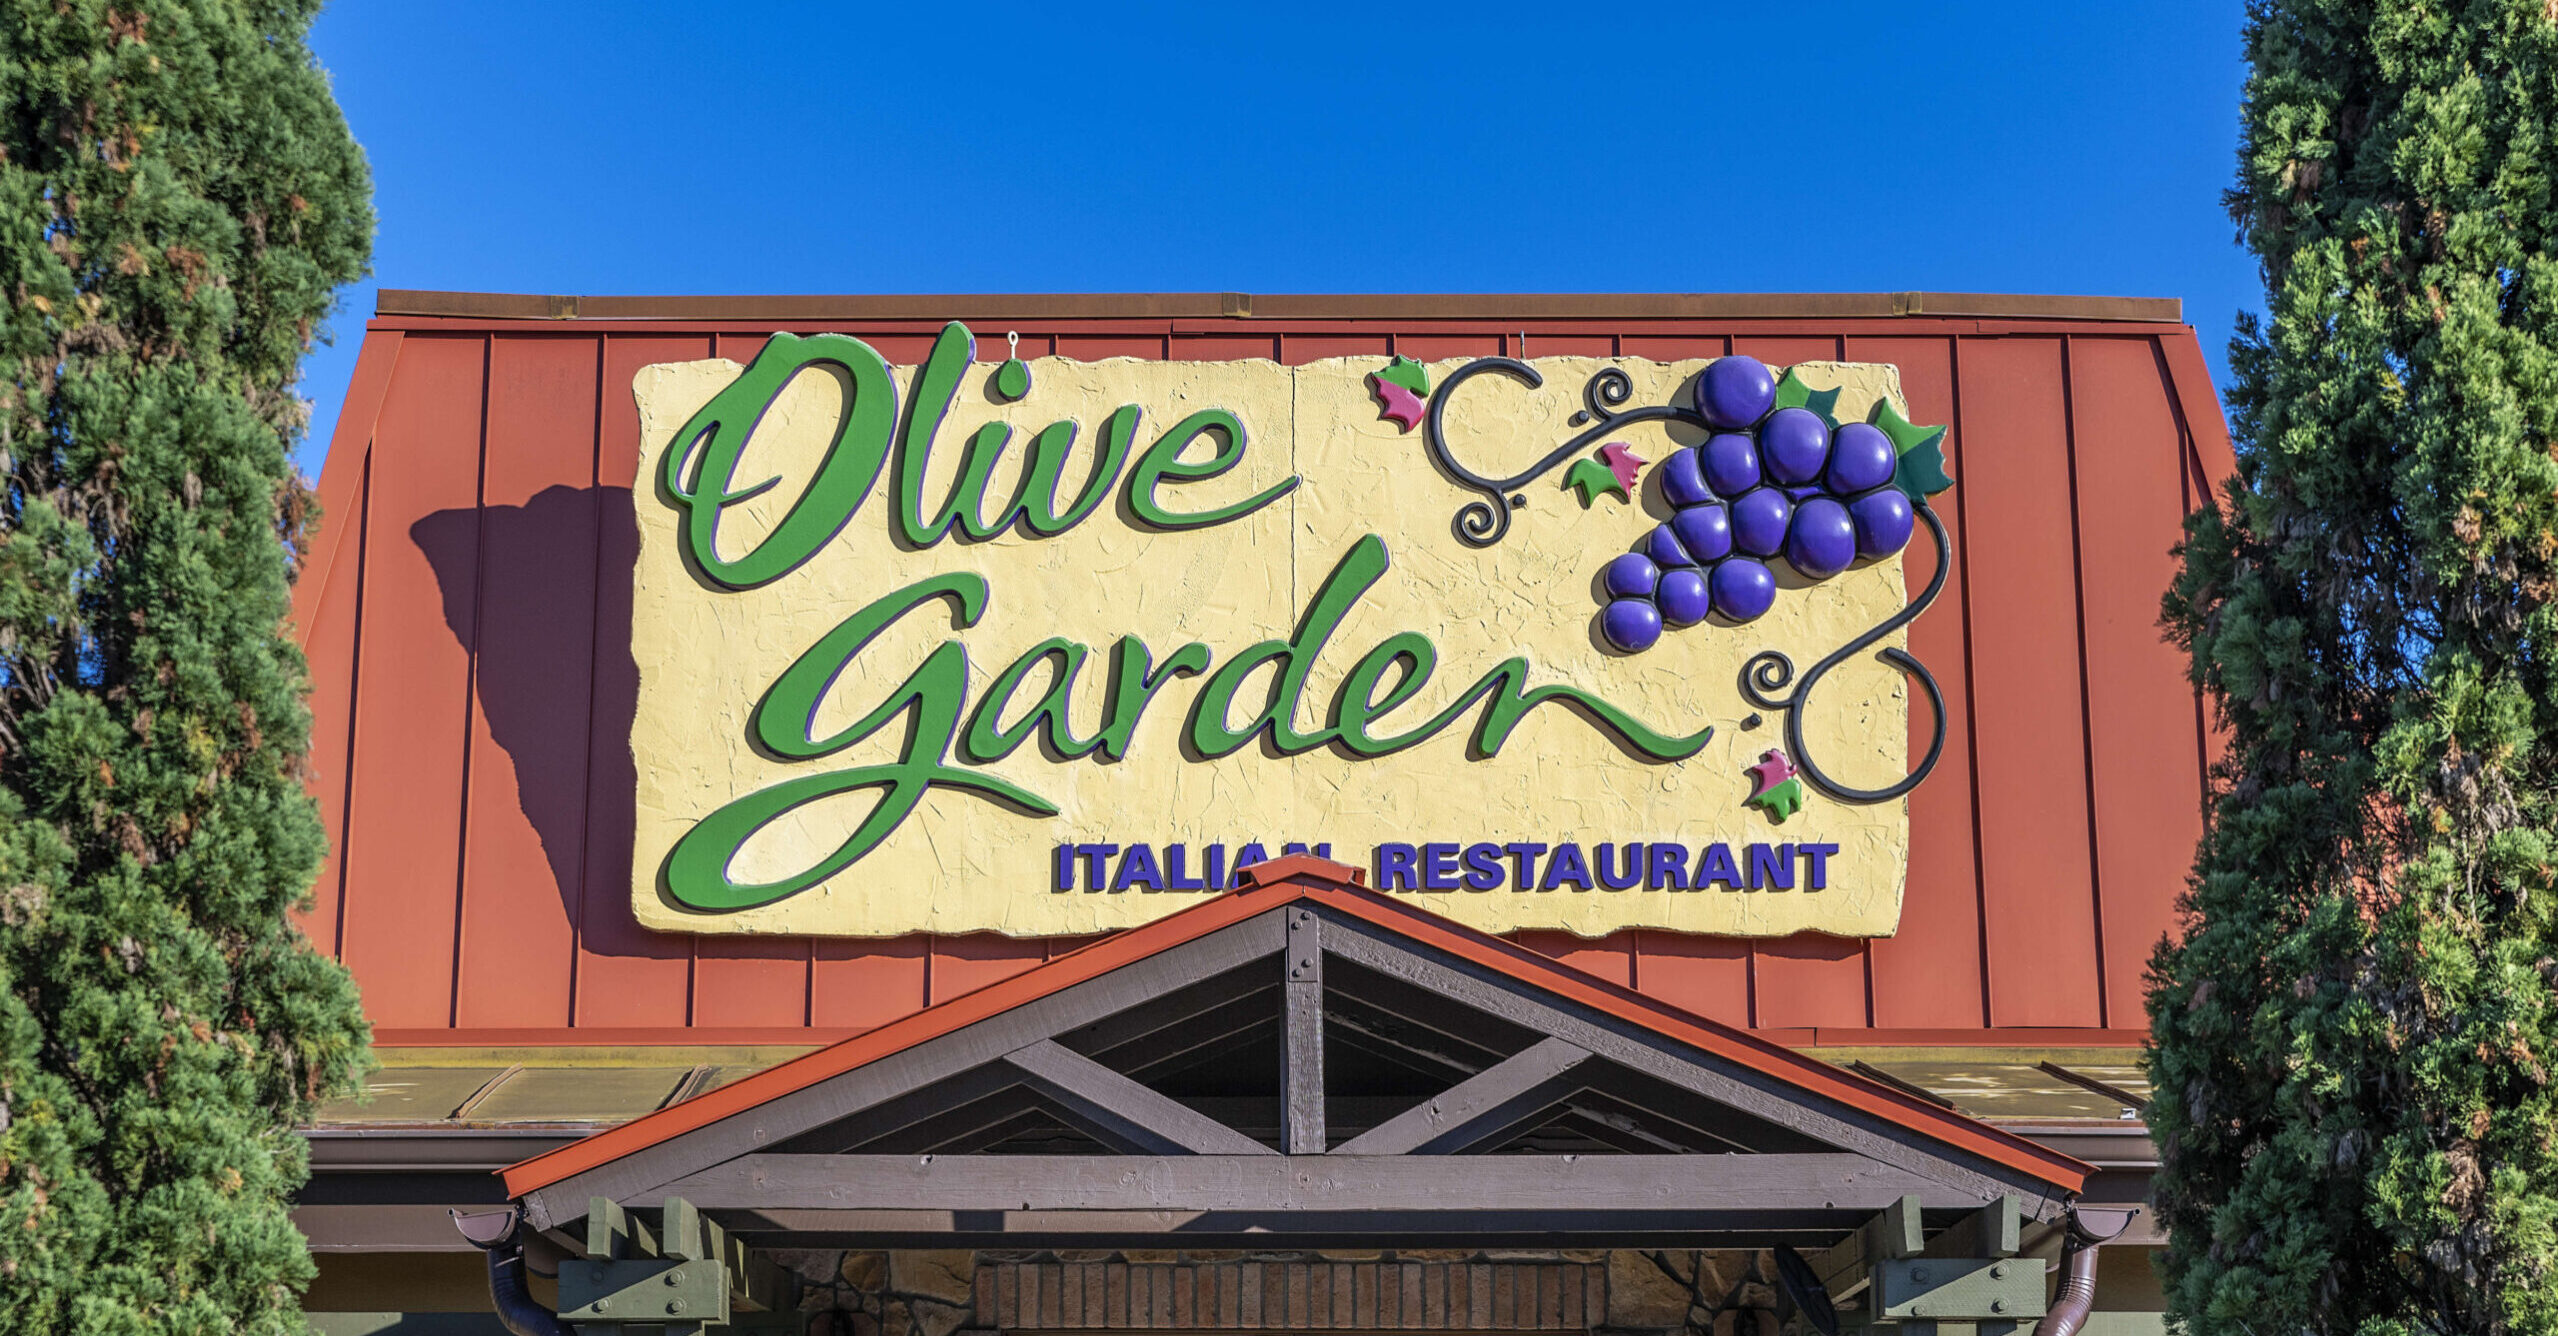 Is Olive Garden Going Out of Business? | Snopes.com